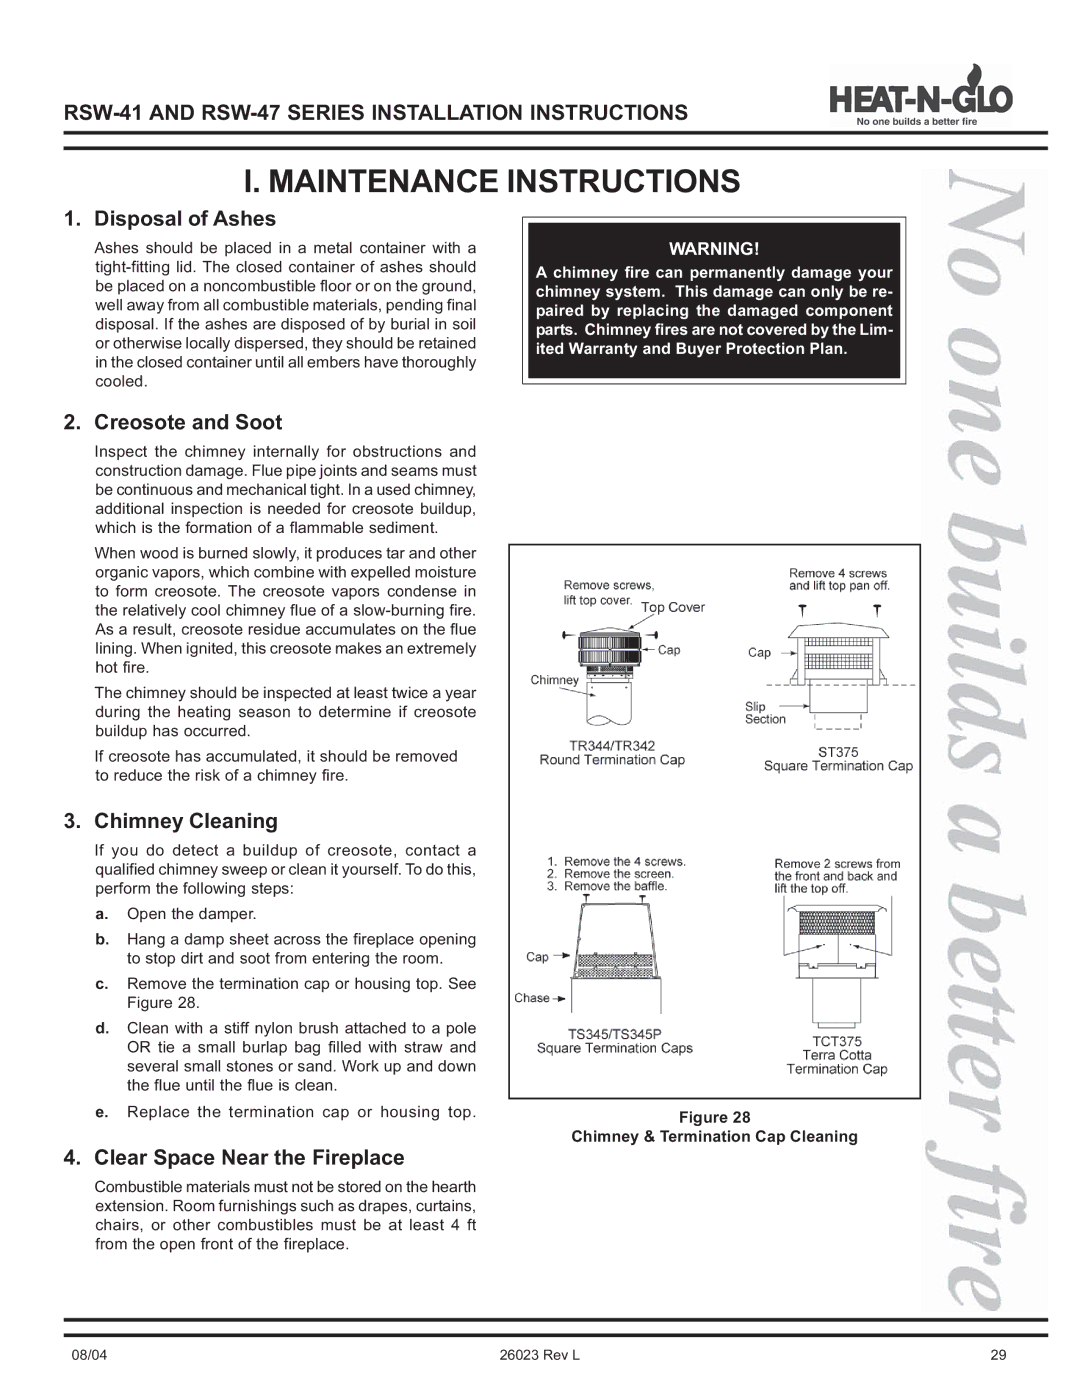 Hearth and Home Technologies RSW-47 manual Maintenance Instructions, Disposal of Ashes, Creosote and Soot, Chimney Cleaning 